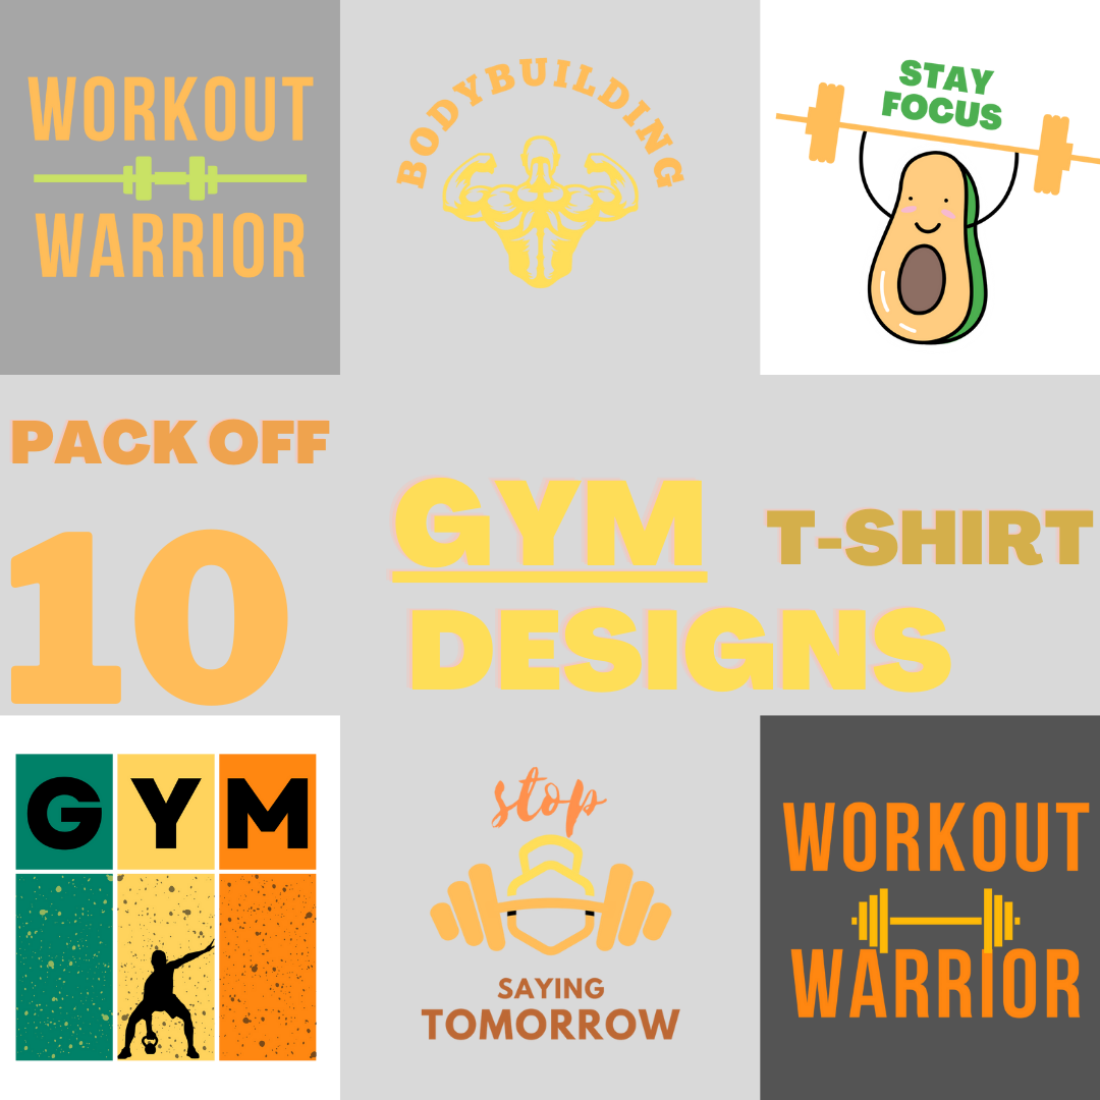 Fitness Gym T-Shirt Designs cover image.